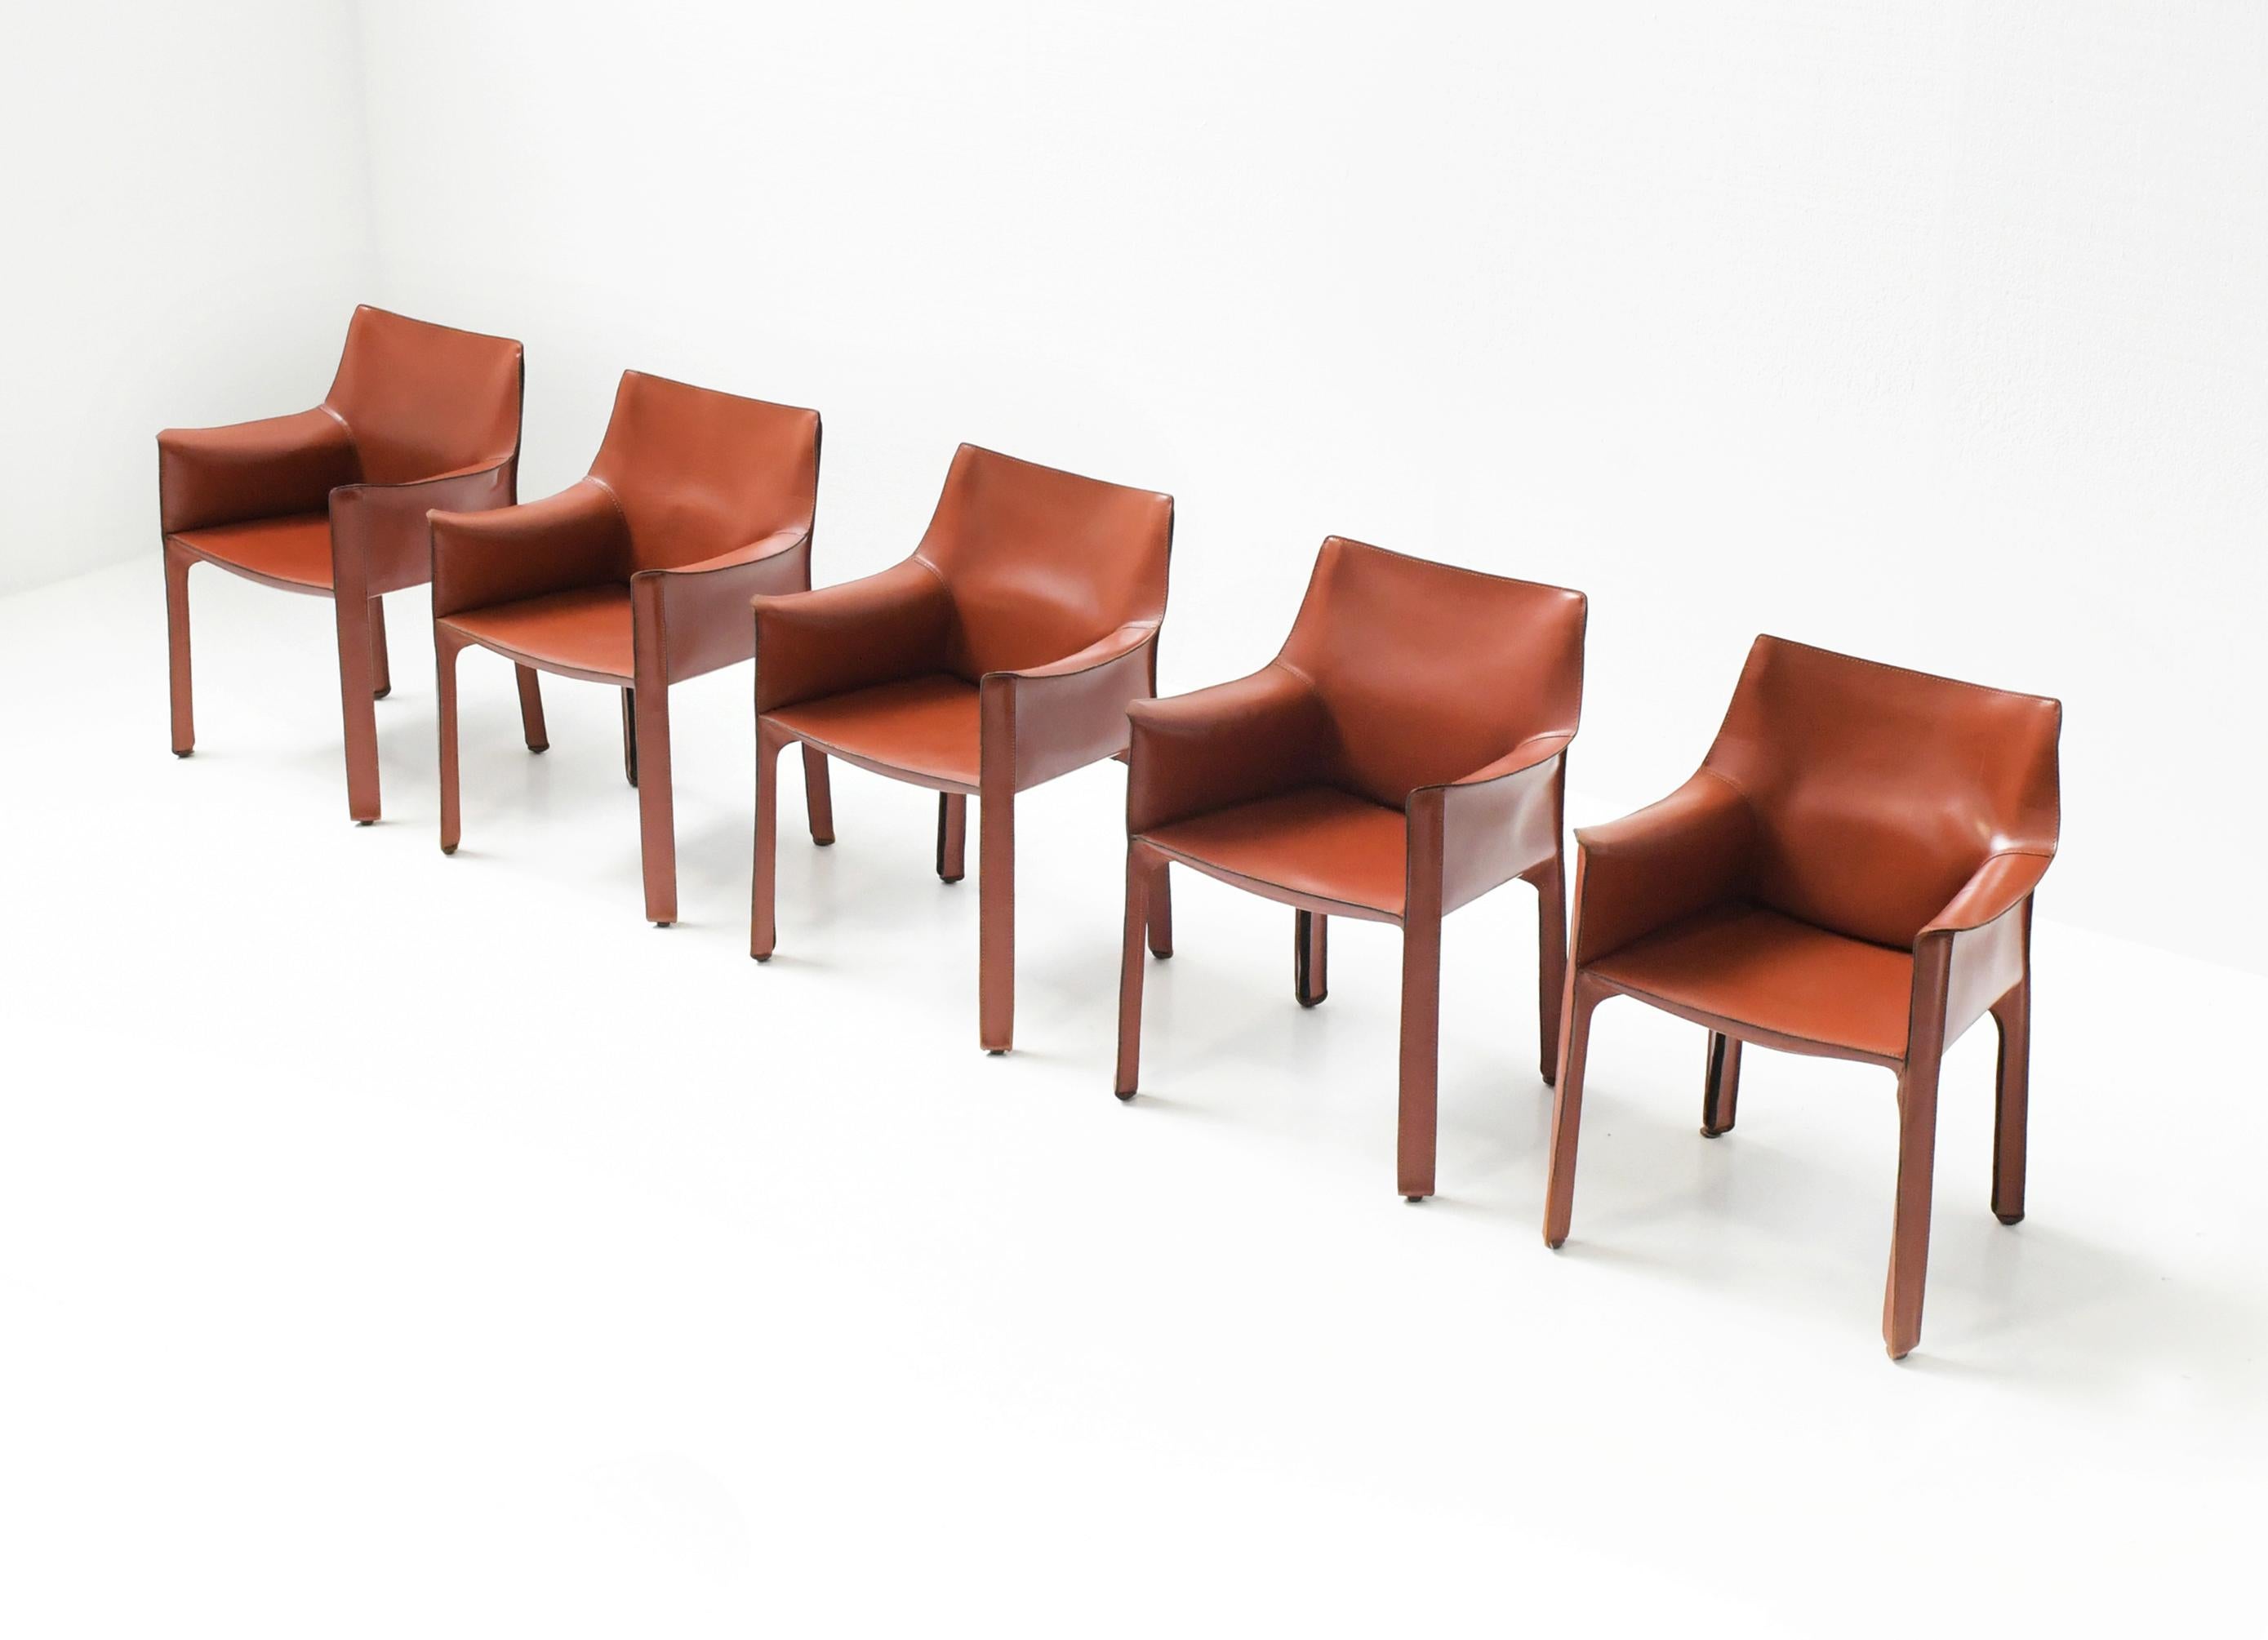 Nice set of 5 ‘Cab 413’ dining chairs in burgundy red leather. 
Designed by Mario Bellini for Cassina.

Very good condition. No damage or reparation.
Normal signs of use for its age.

Dimensions :
w62 x d52 x h82 cm
seating hight : 45